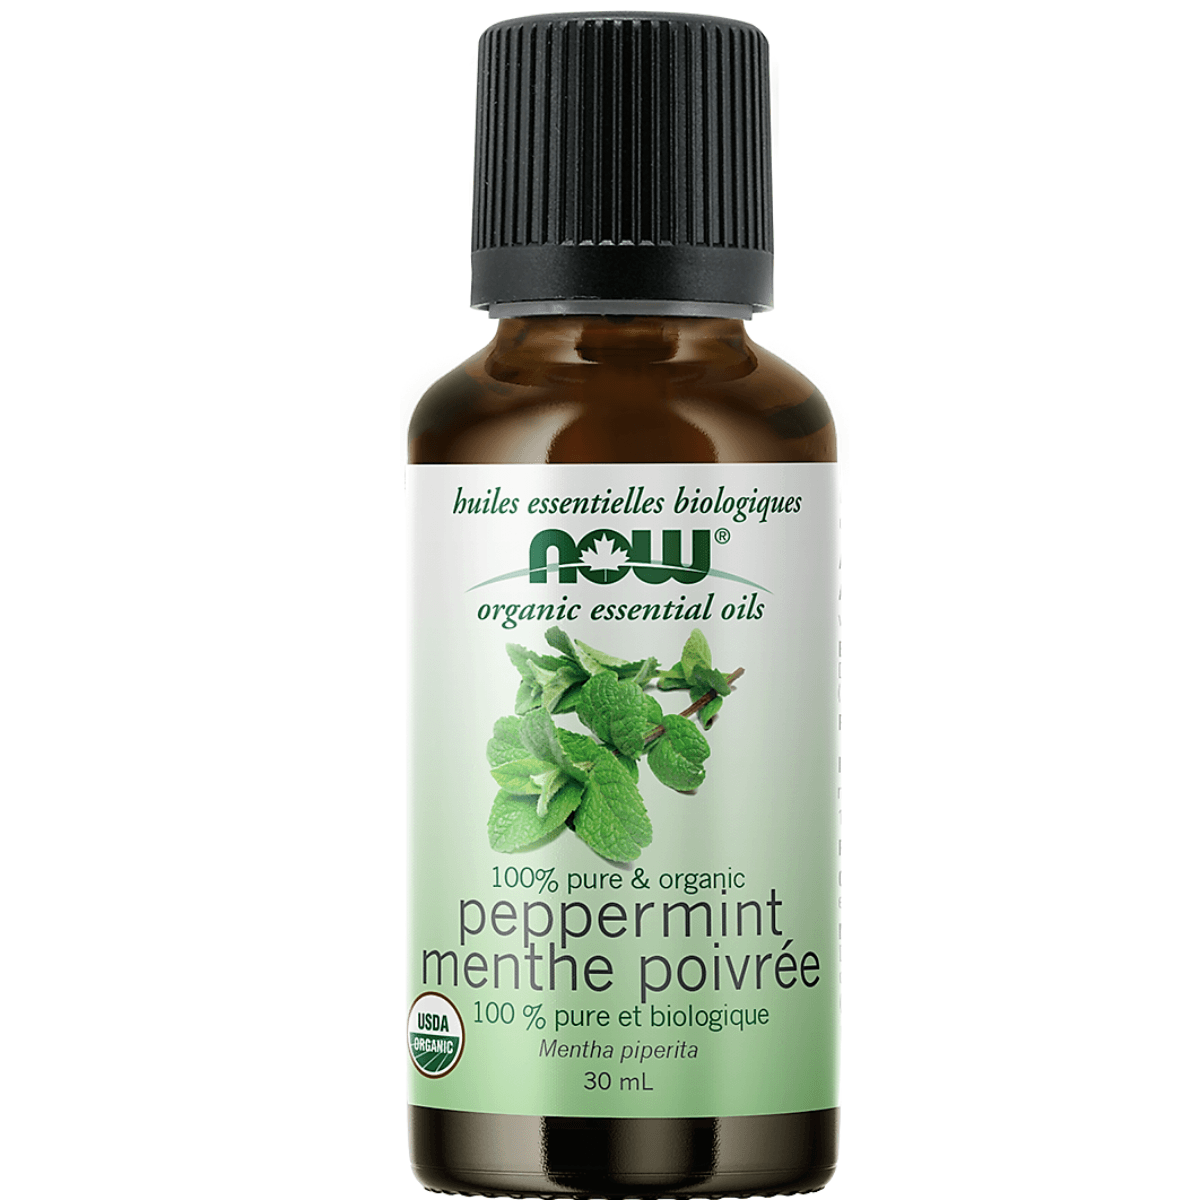 NOW Peppermint Oil 30 ml ORG. Essential Oils at Village Vitamin Store